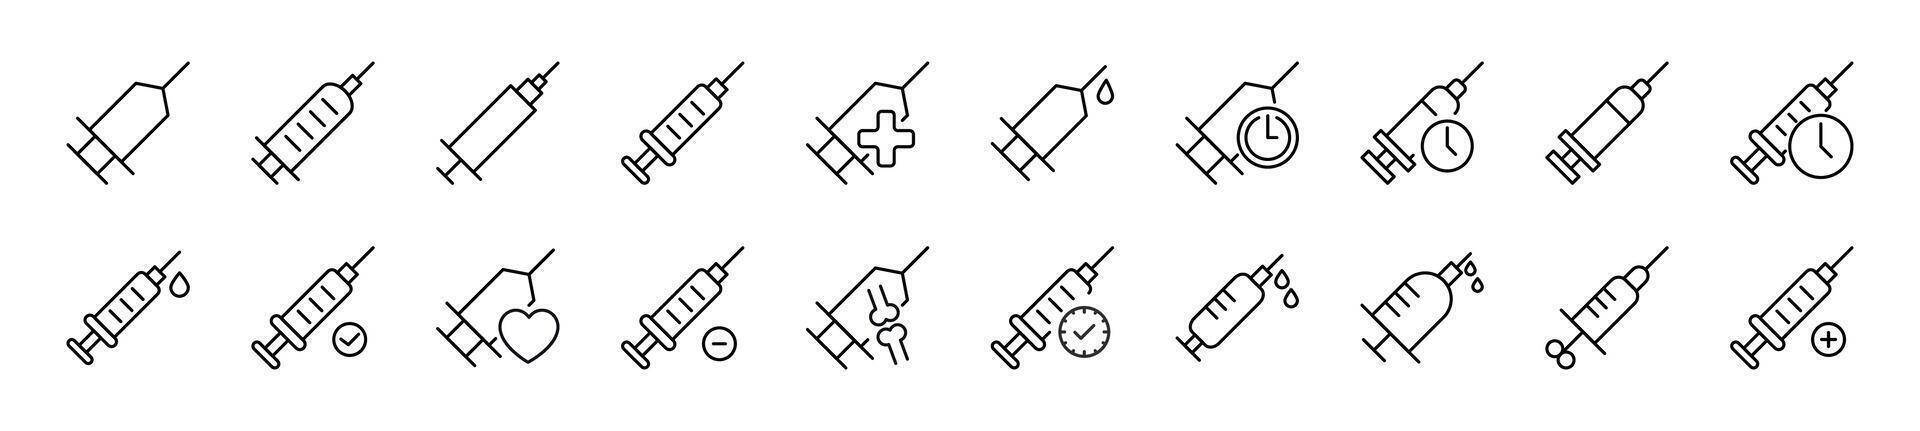 Collection of thin signs of syringe. Editable stroke. Simple linear illustration for stores, shops, banners, design vector